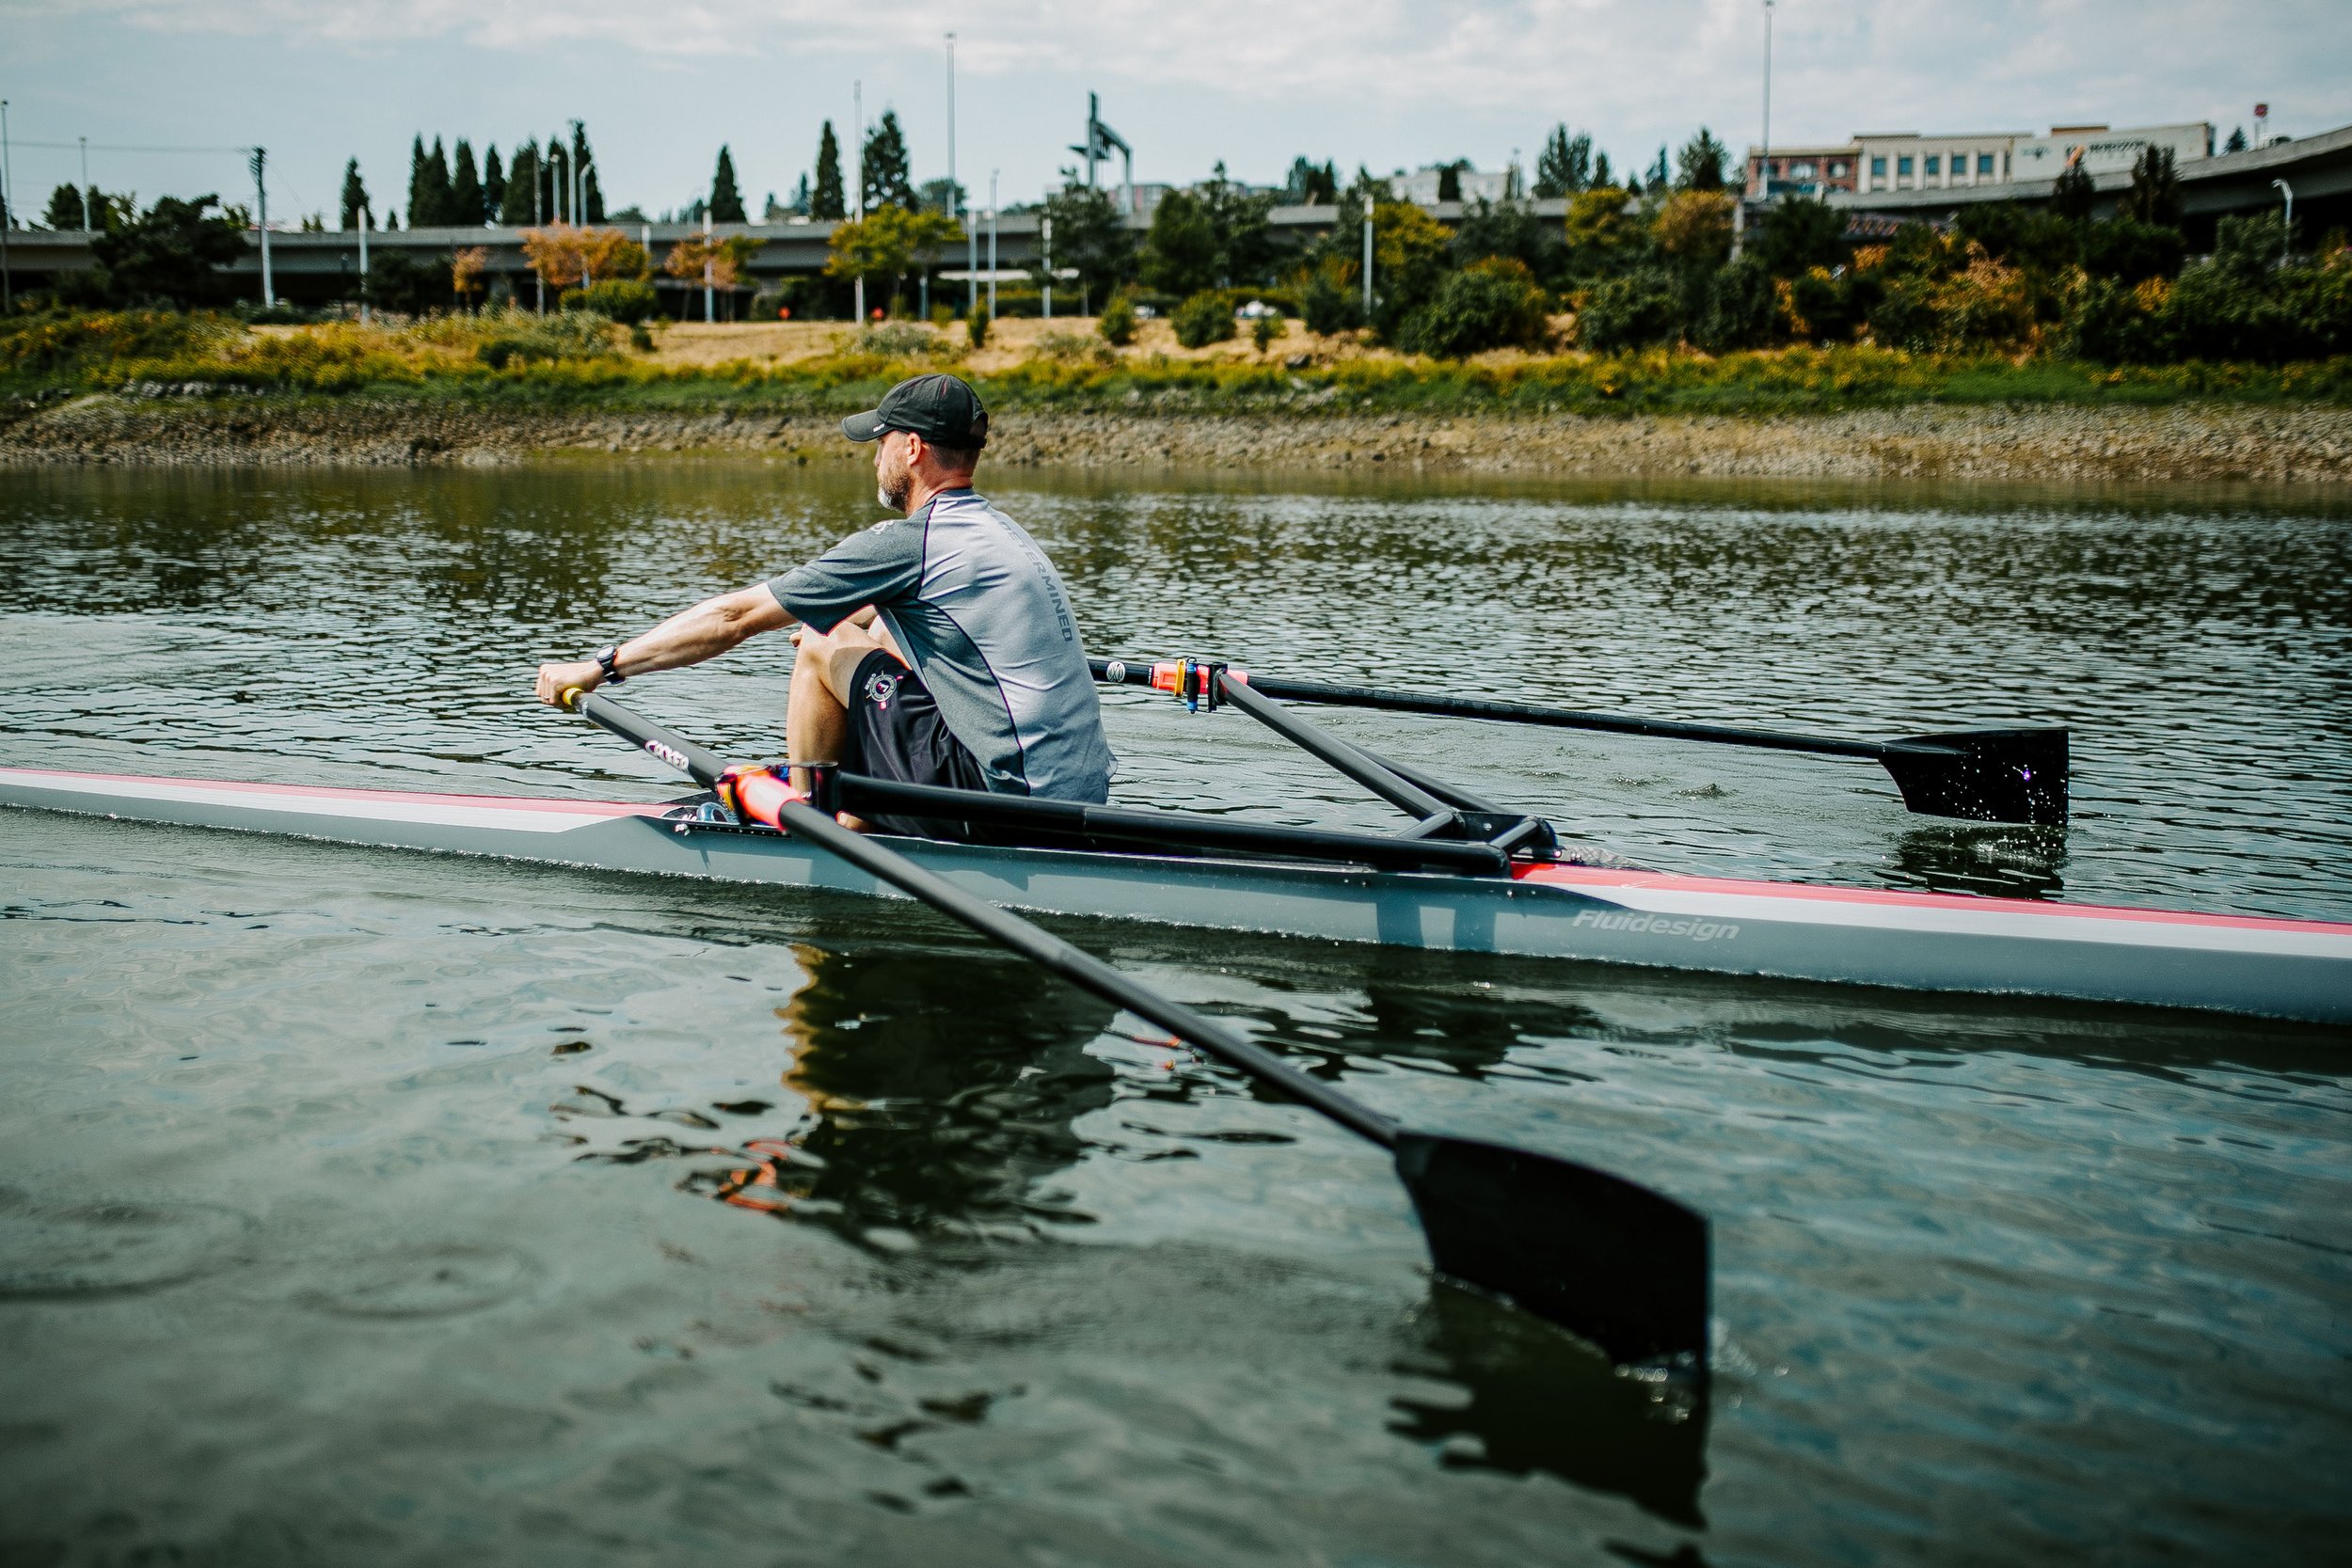  Dave Harvey, founder of Tacoma Rowing, and partner in the Know You Can Row campaign, rows his 1x on the Foss Waterway in the shadow of Mount Tahoma, and on the homelands of the Puyallup Tribe and the Coastal Salish tribes. 